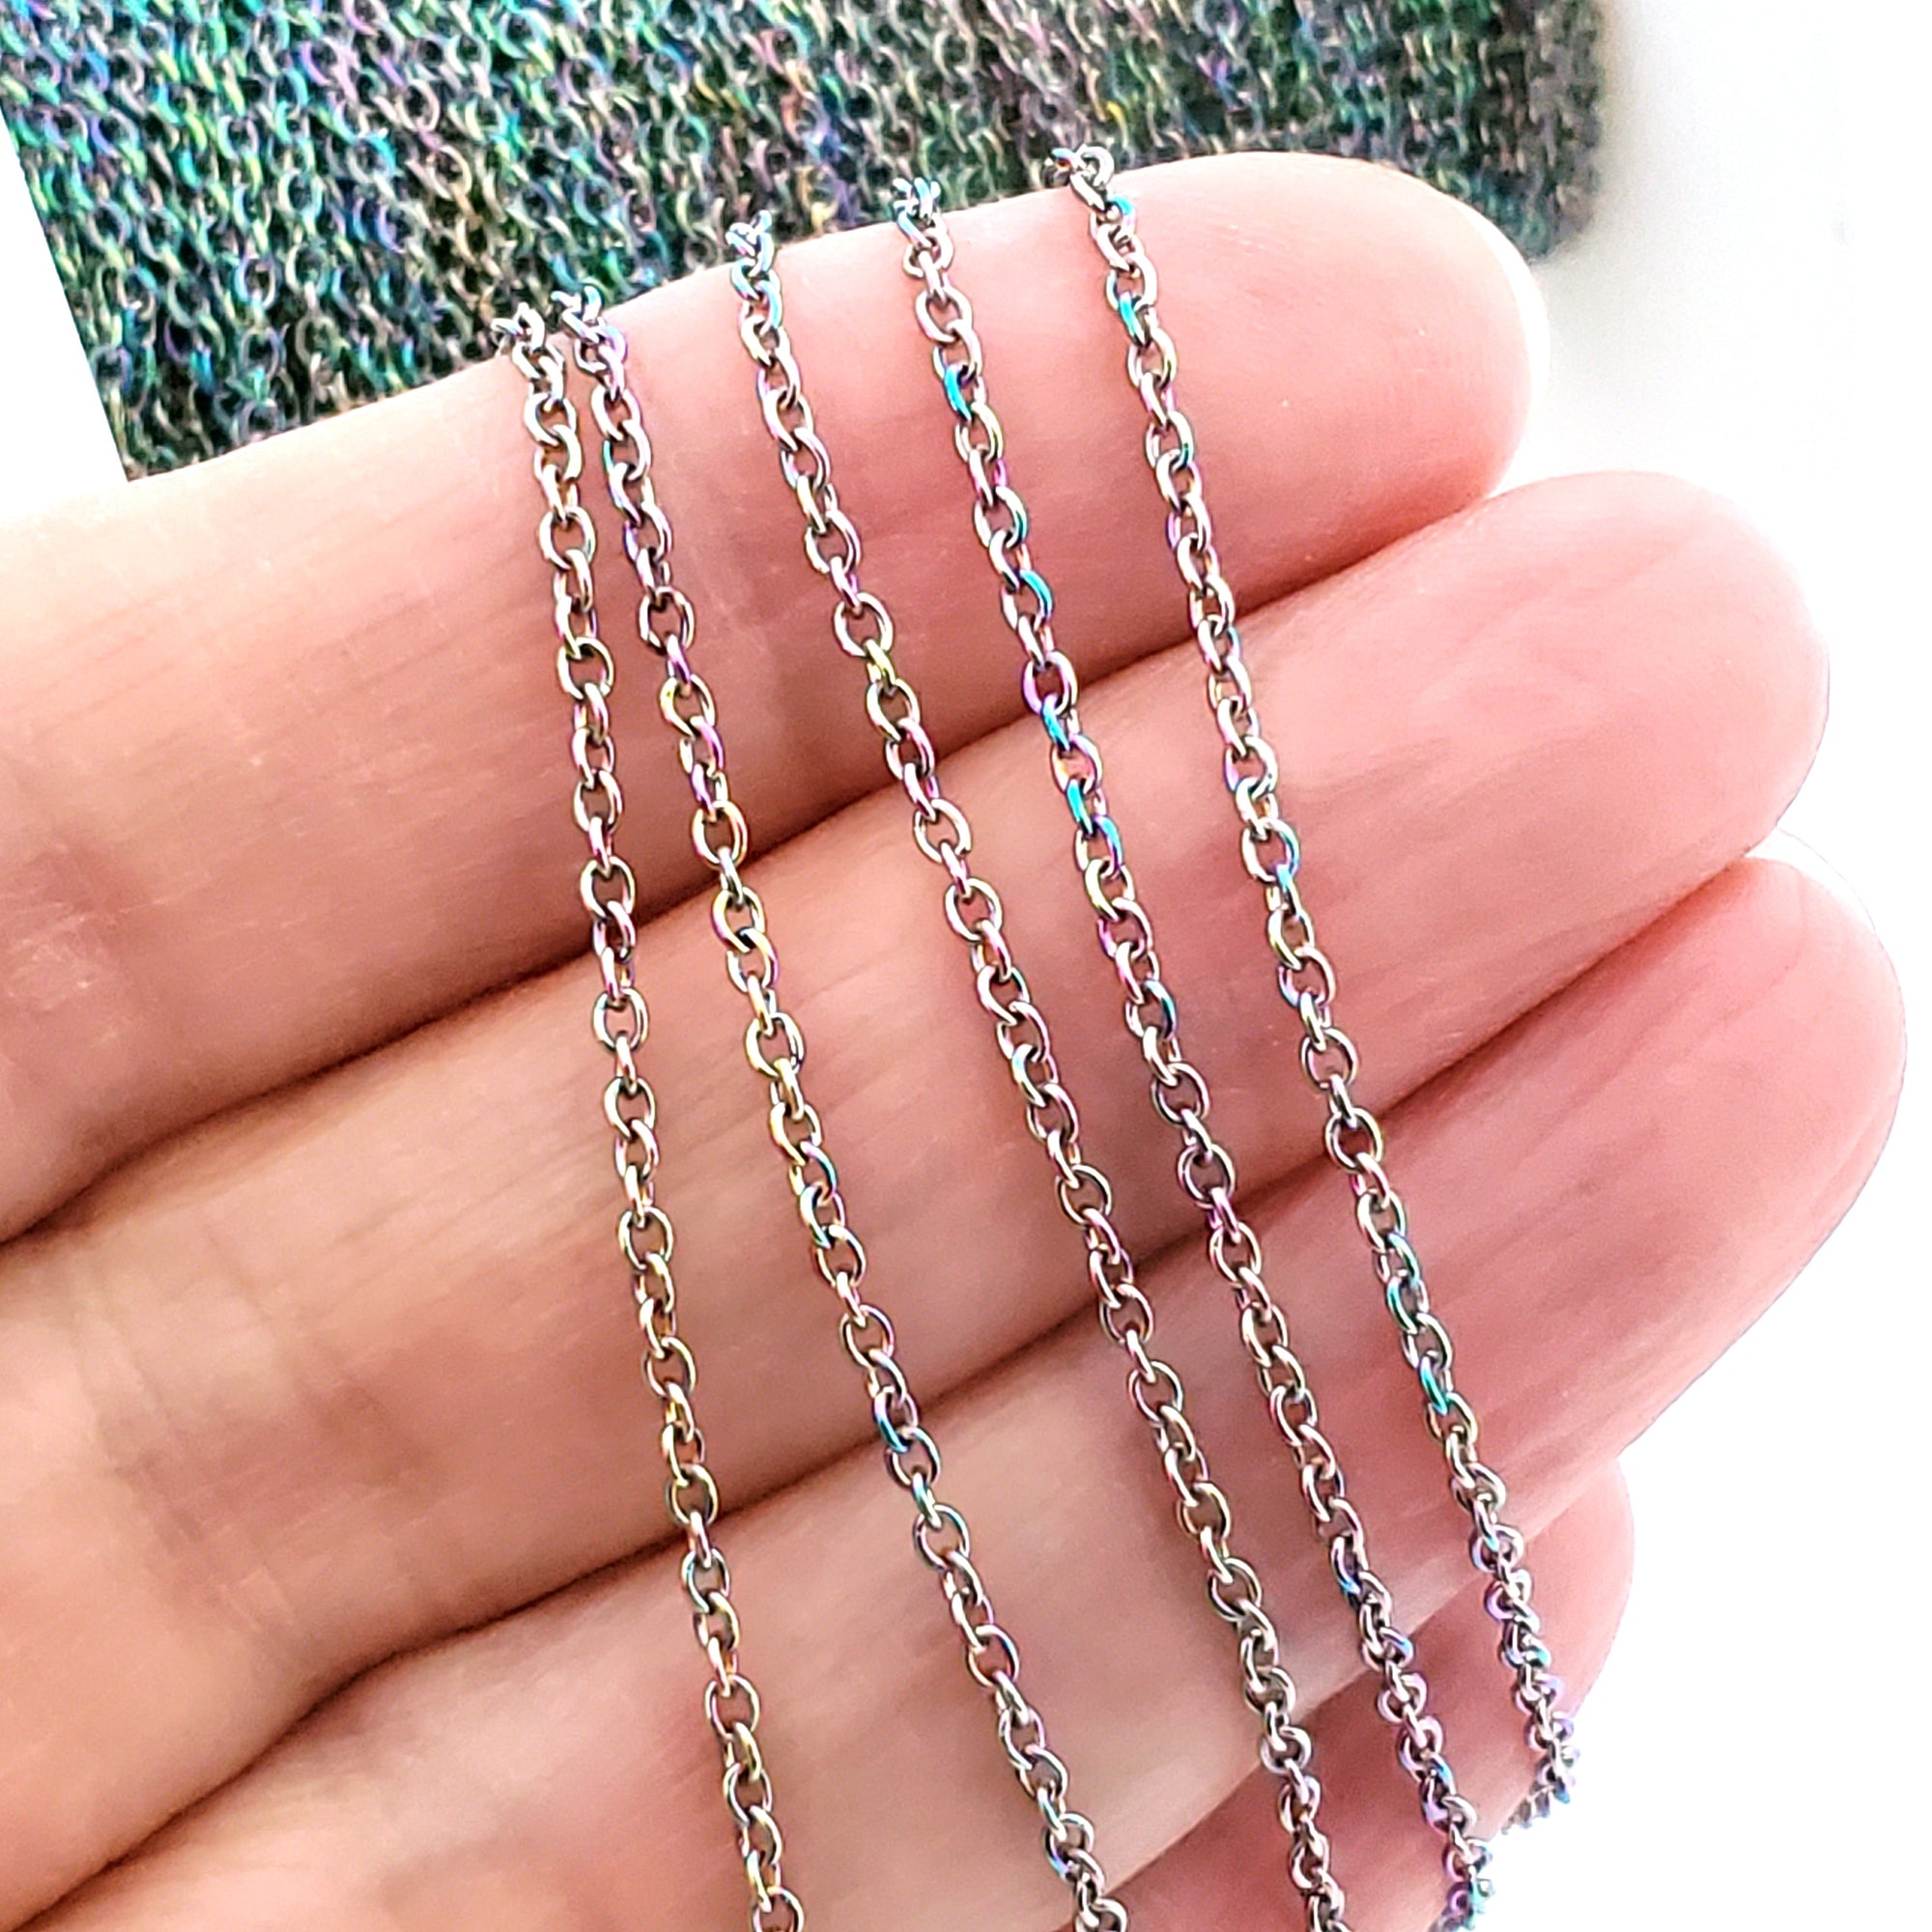 5 Meters/Lot Never Fade Thicken Stainless Steel Necklace Chains Bulk For  DIY Jewelry Findings Making Materials Handmade Supplies